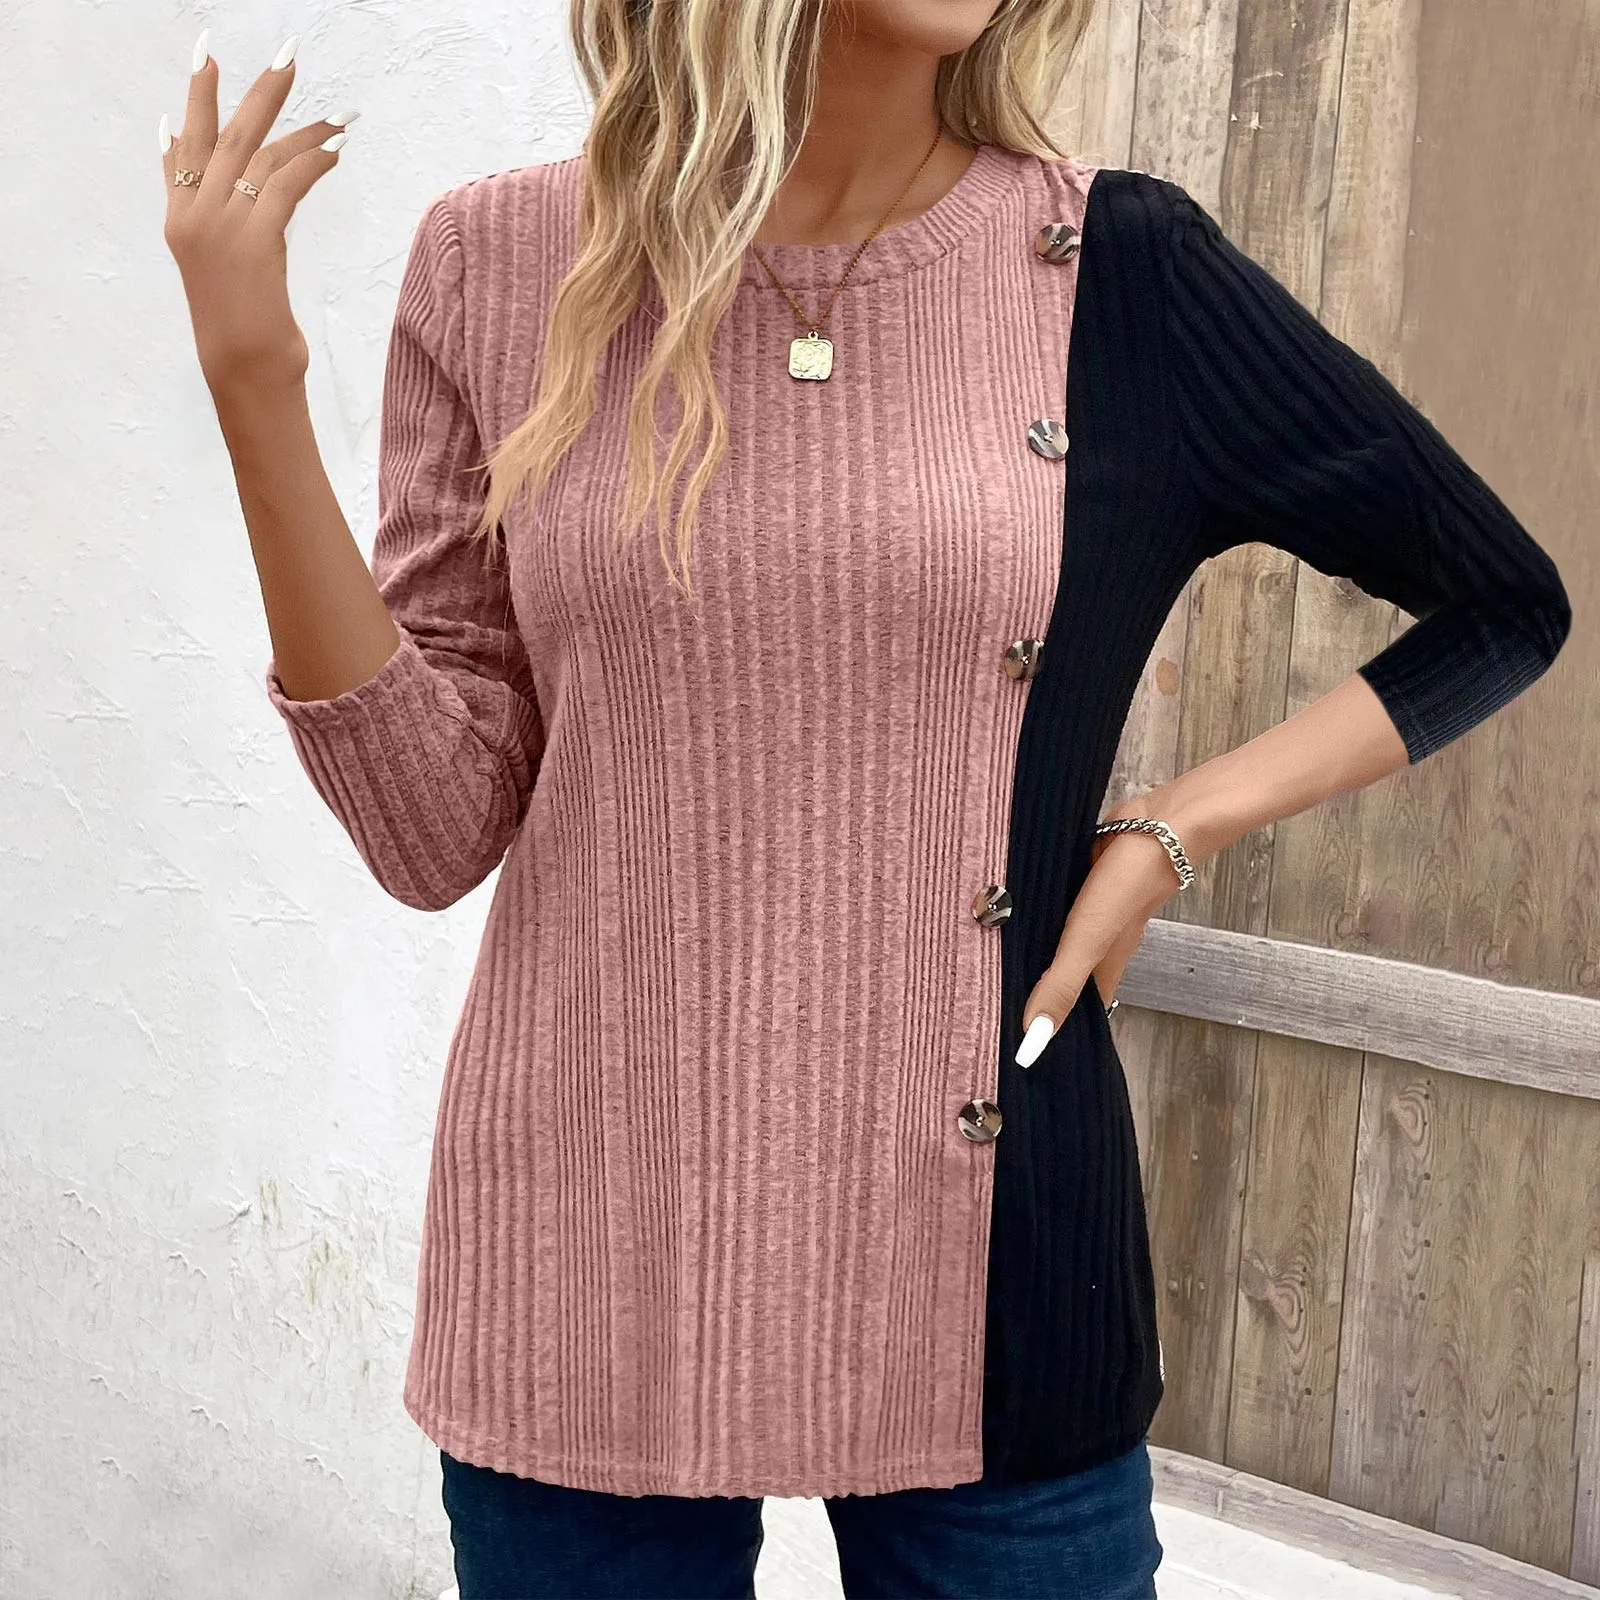 

Women's Tops Autumn Winter Vintage Contrast Color Button Elegant T-shirts Casual O Neck Long Sleeve Loose Tunic pullover